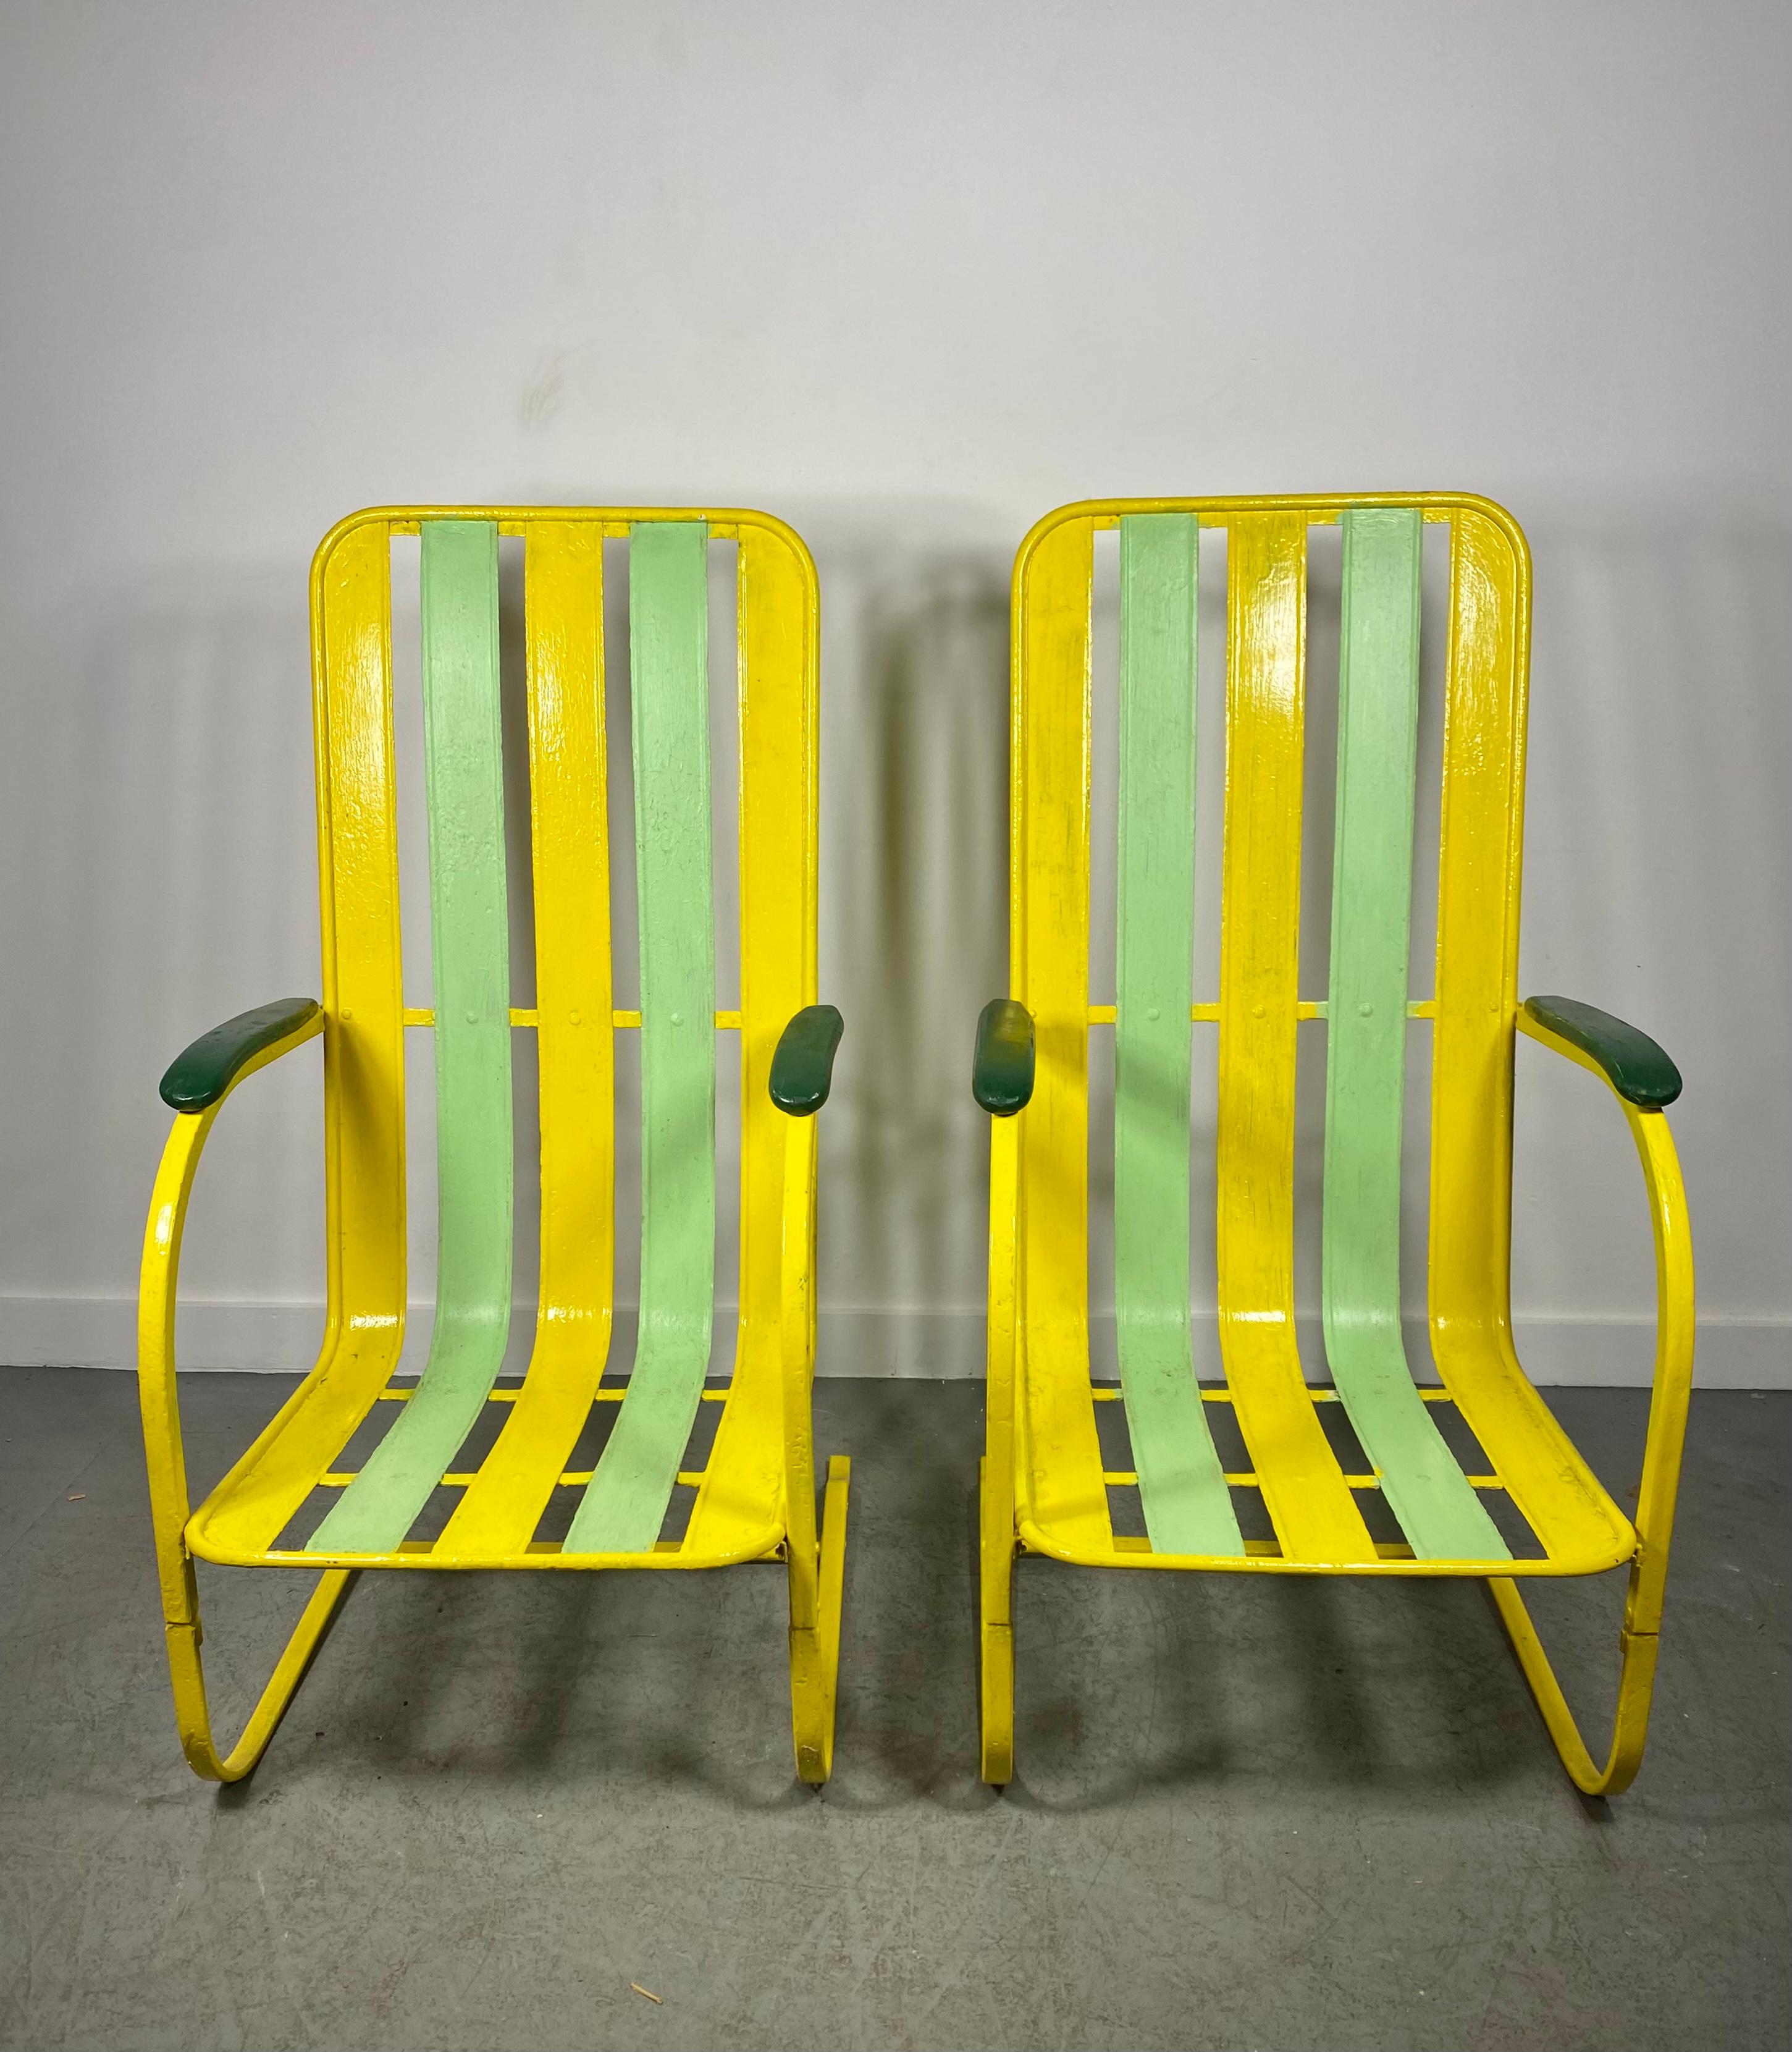 Classic Pair Art Deco High Back Slatted Spring Steel Lounge Chairs In Good Condition For Sale In Buffalo, NY